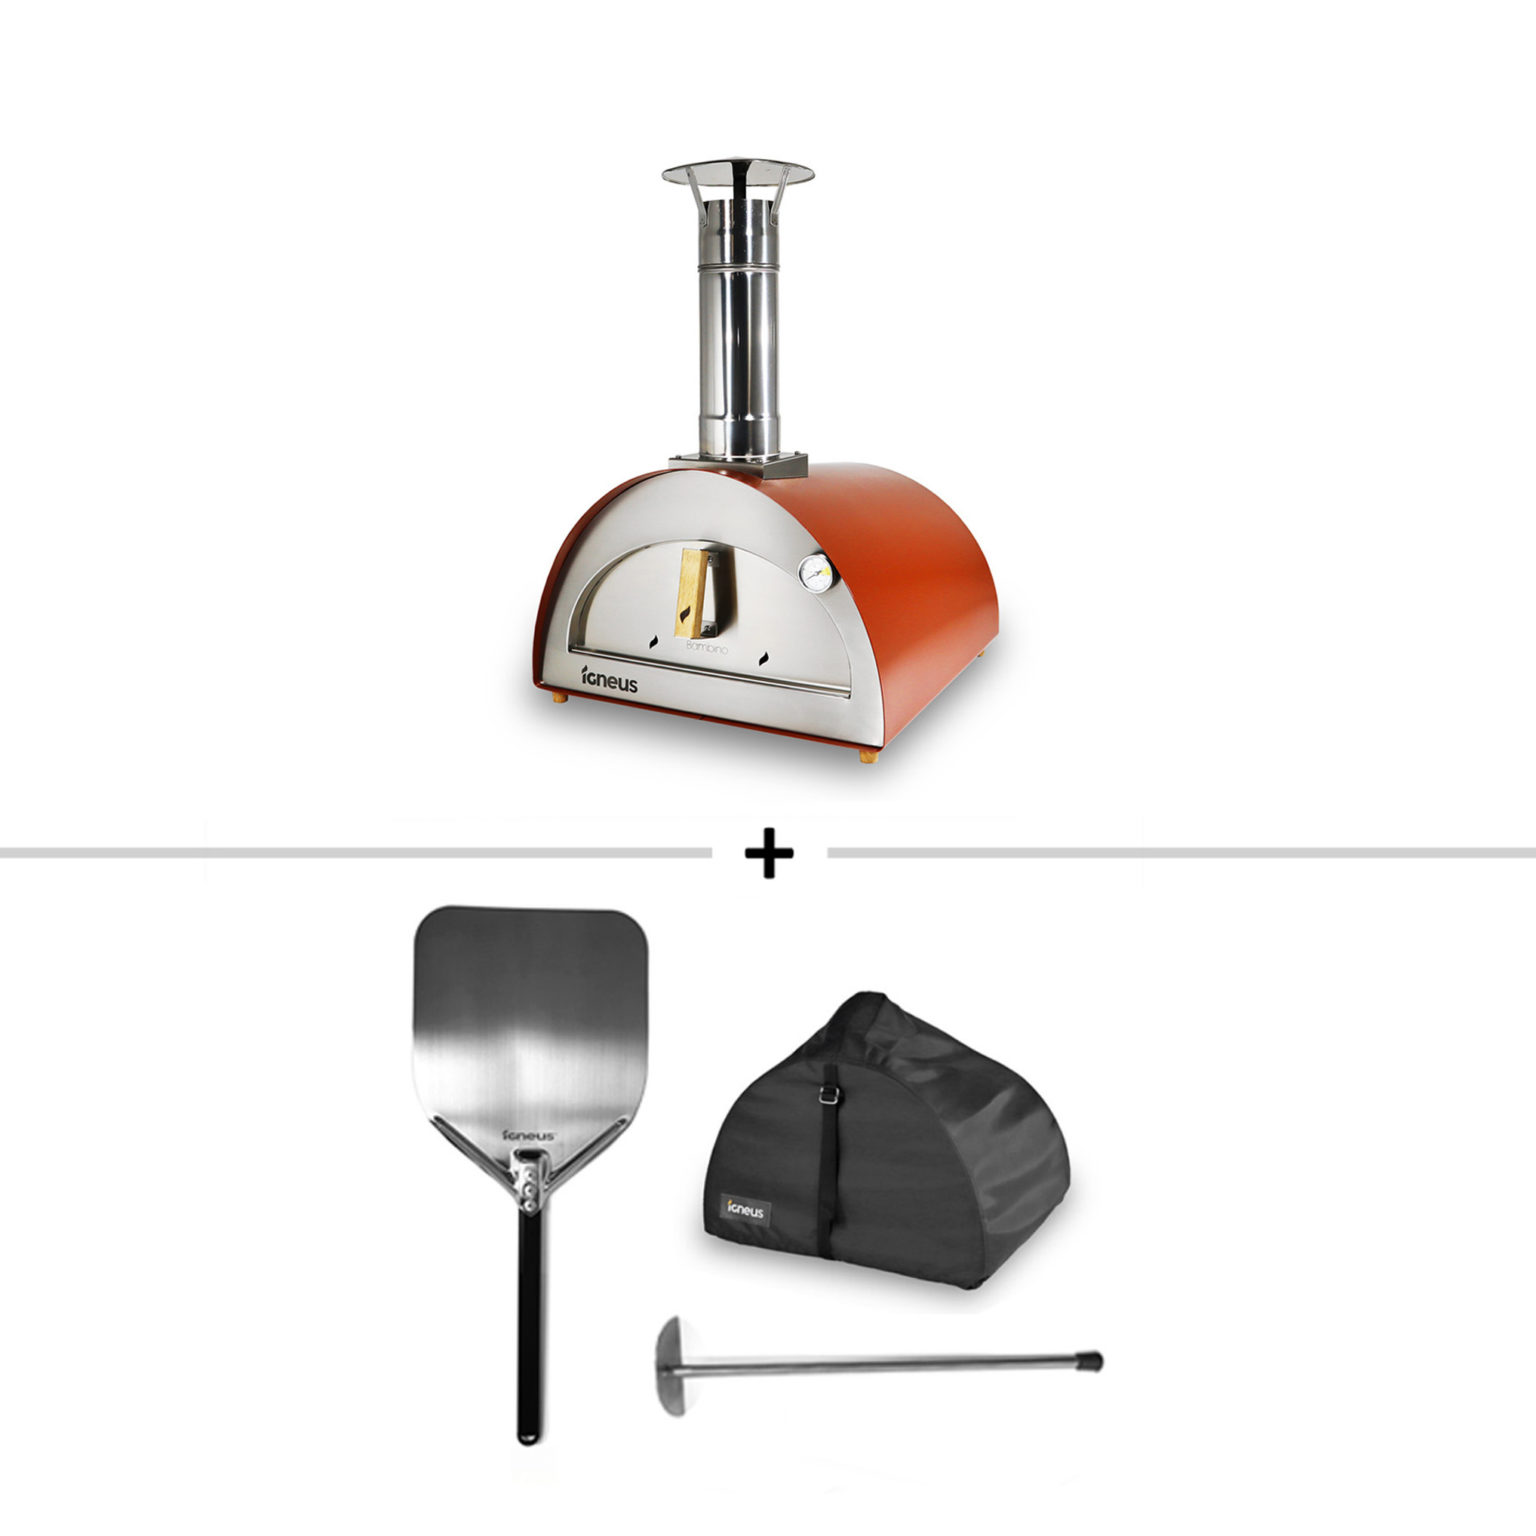 Igneus Bambino Starter Bundle Deal wood fired pizza oven